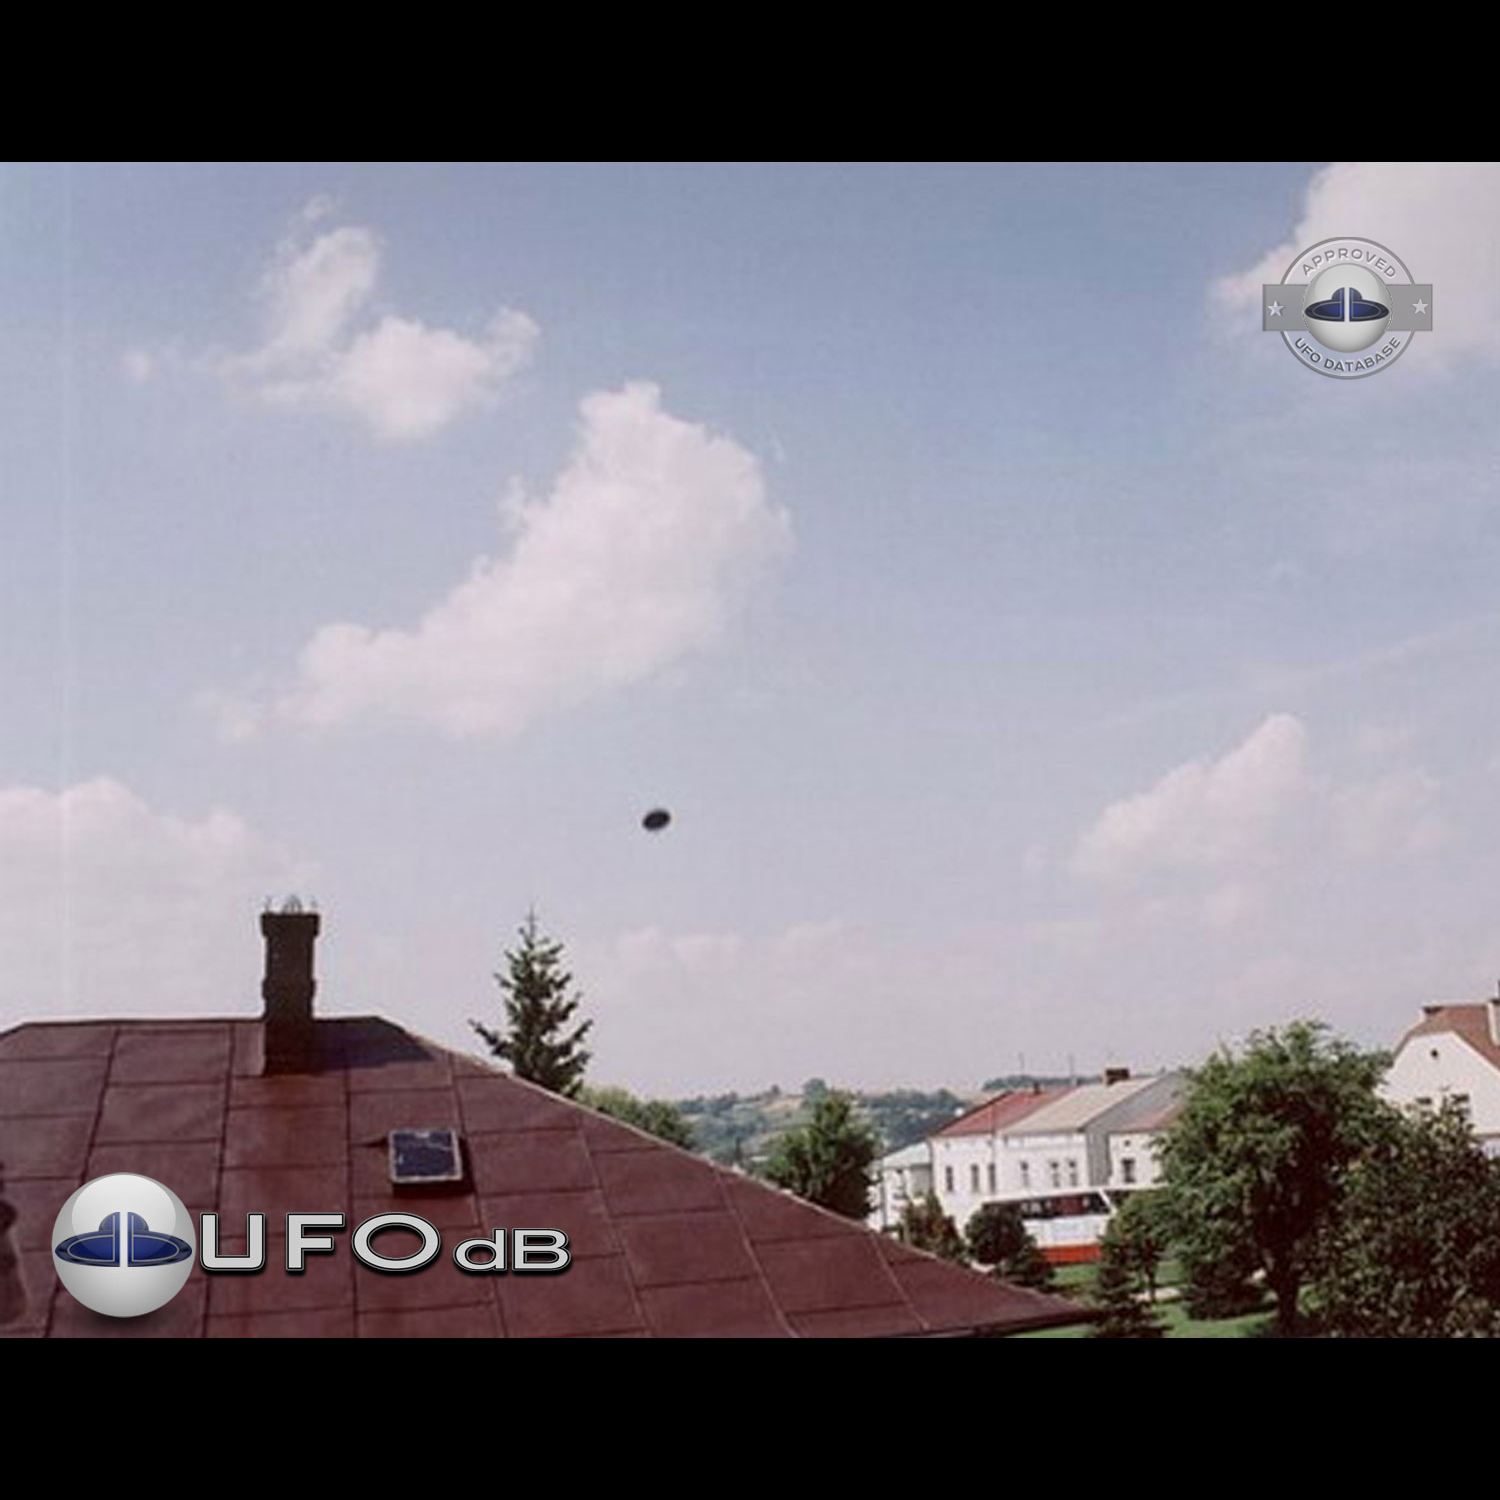 UFO was previously seen in city of Skurowa at a very high altitude UFO Picture #89-1